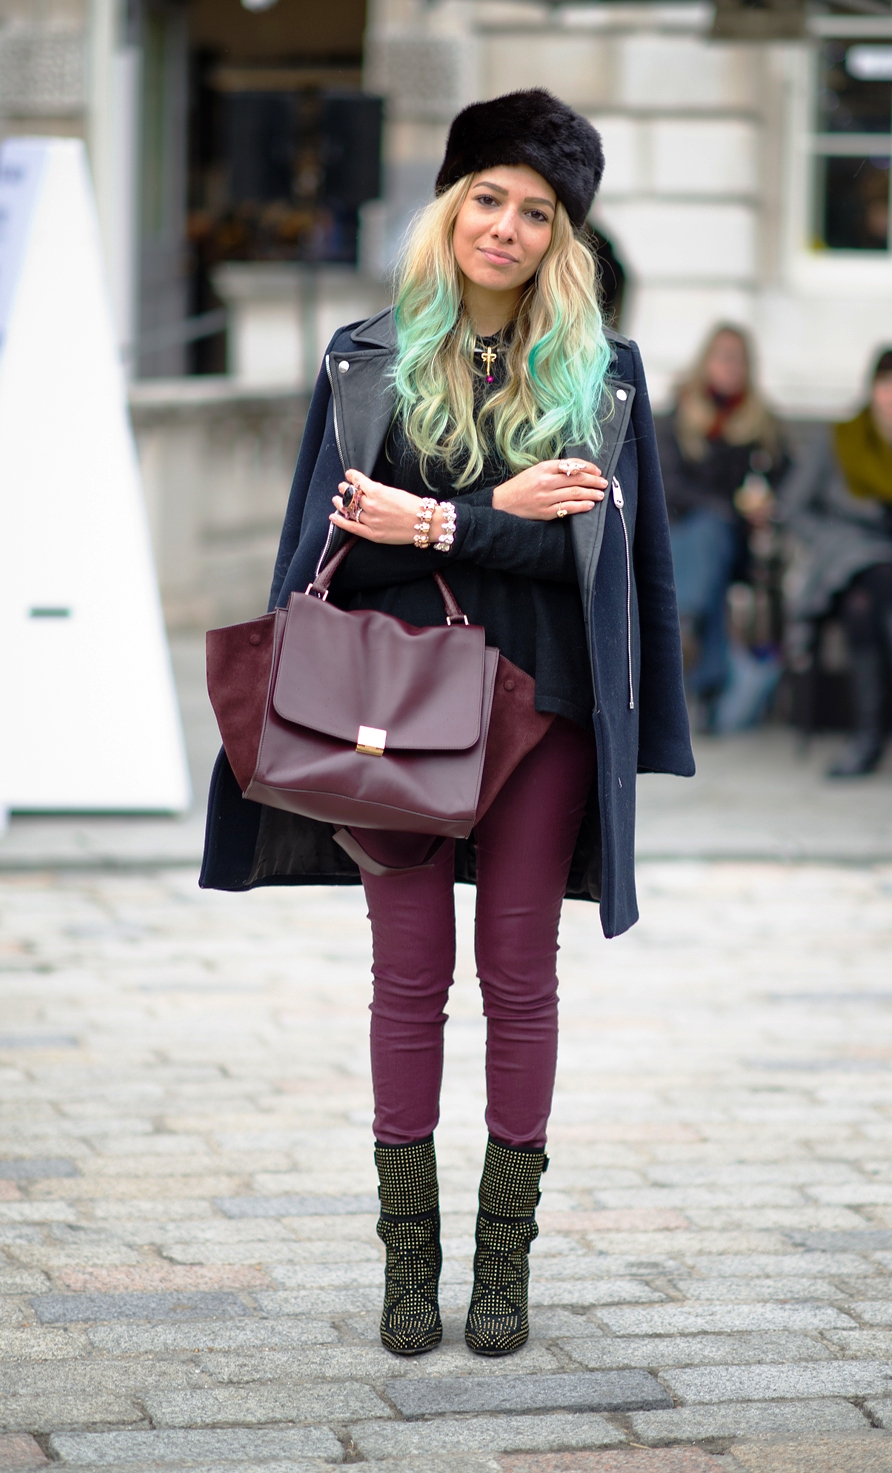 Chic-And-Fancy-Street-Style-Fashion-This-Winter-